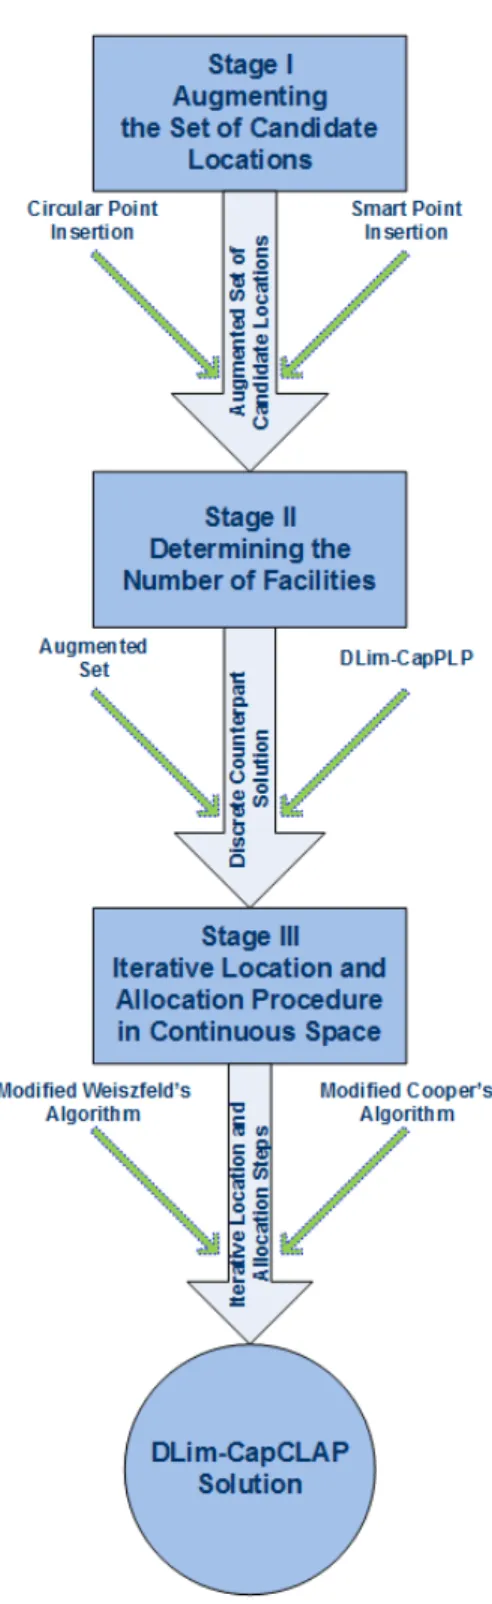 Figure 4.1: Flow Chart of Multistage Heuristic Framework